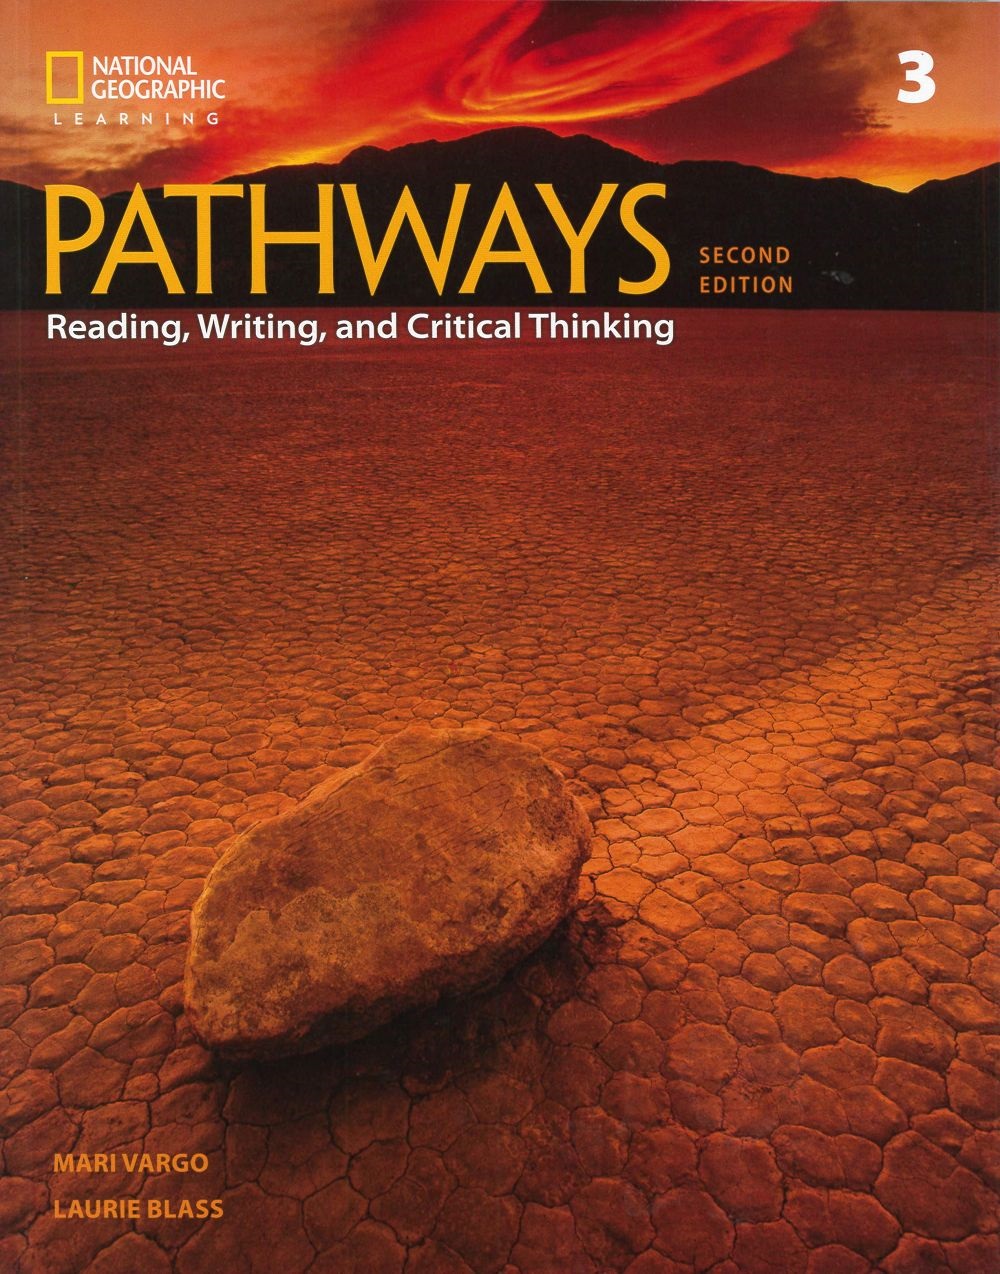 Pathways: Reading, Writing, and Critical Thinking (3) 2/e